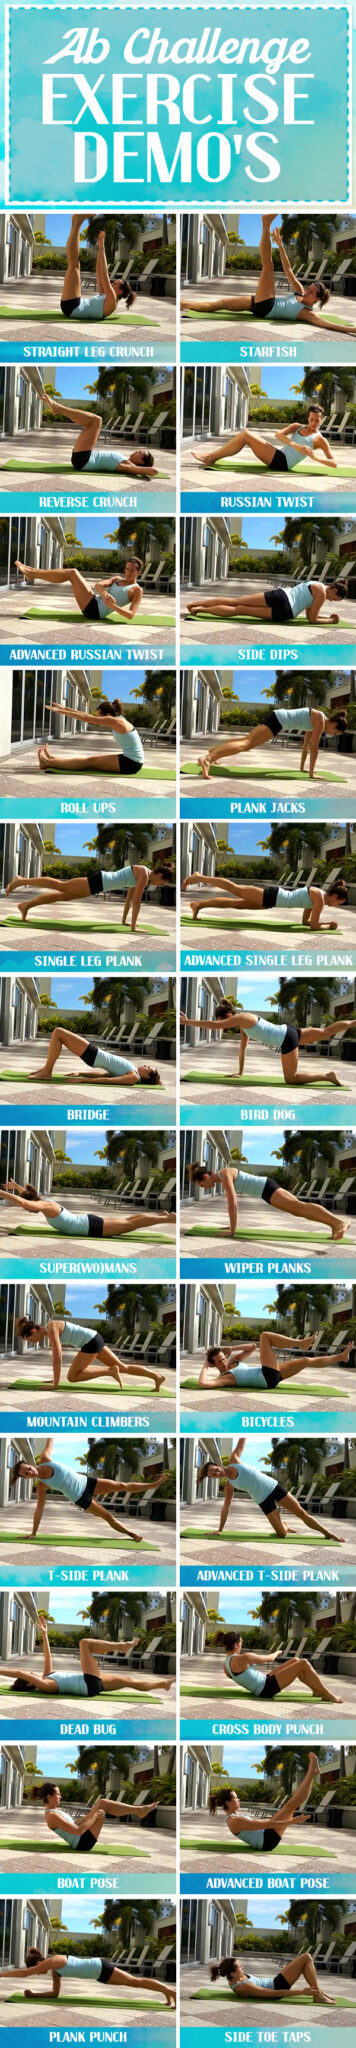 Runner Core Workout Exercises